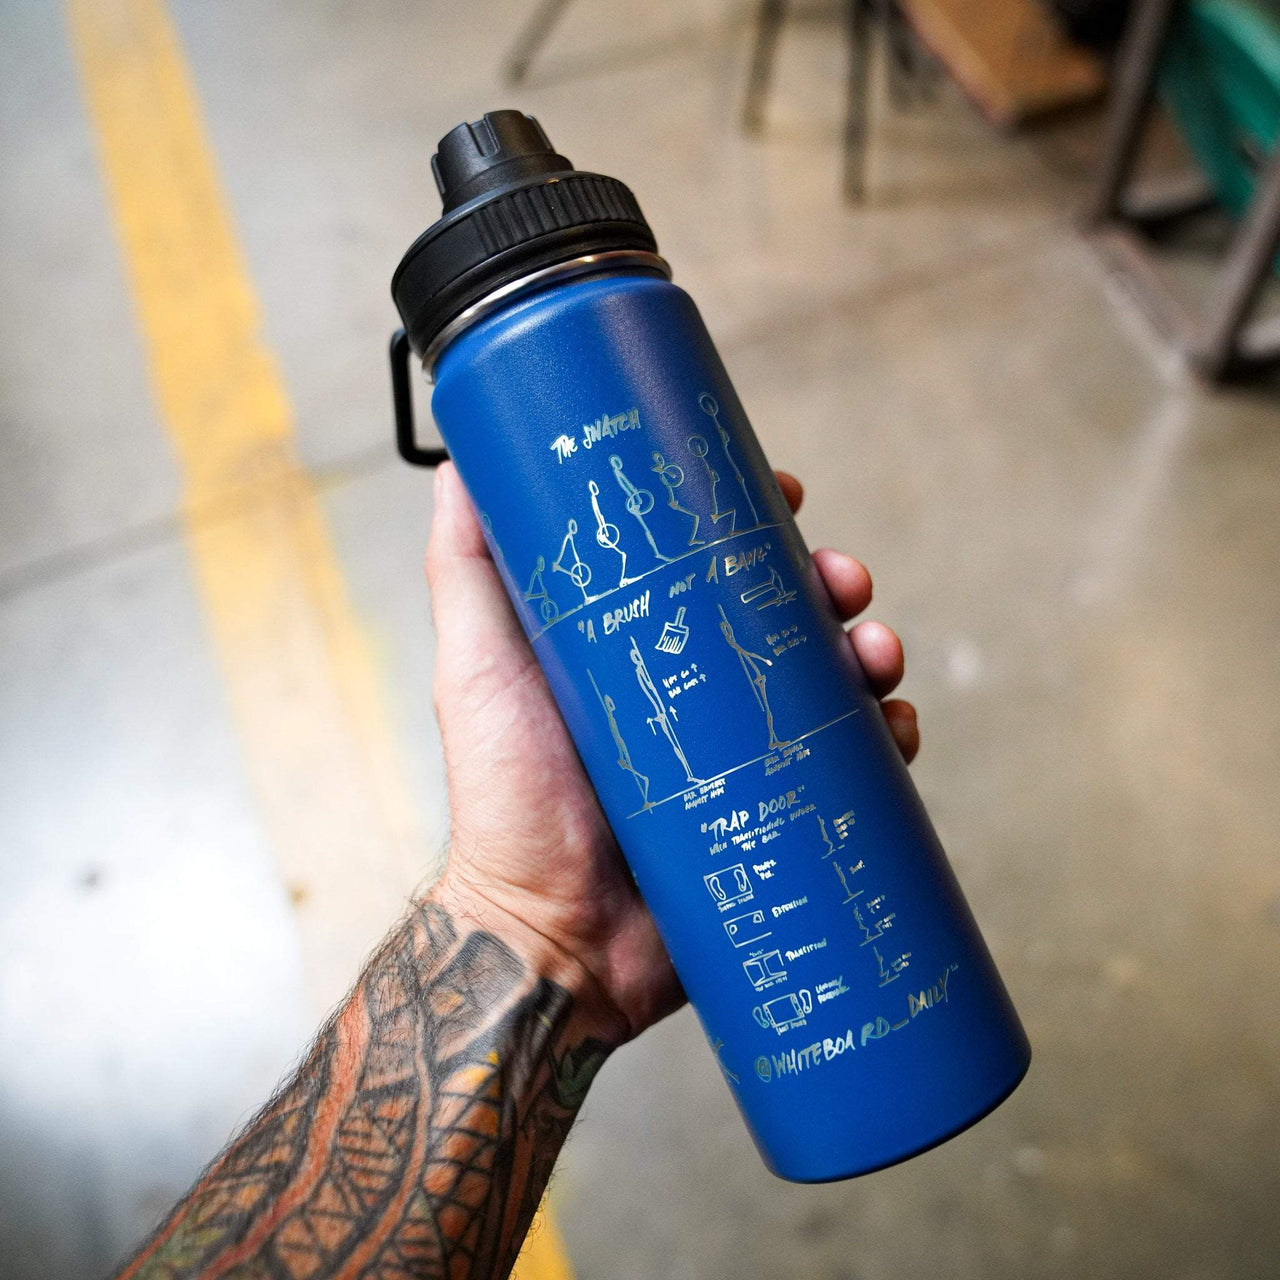 Caffeine and Kilos Inc Accessories WBD X CK Insulated Bottle (3 Colors)